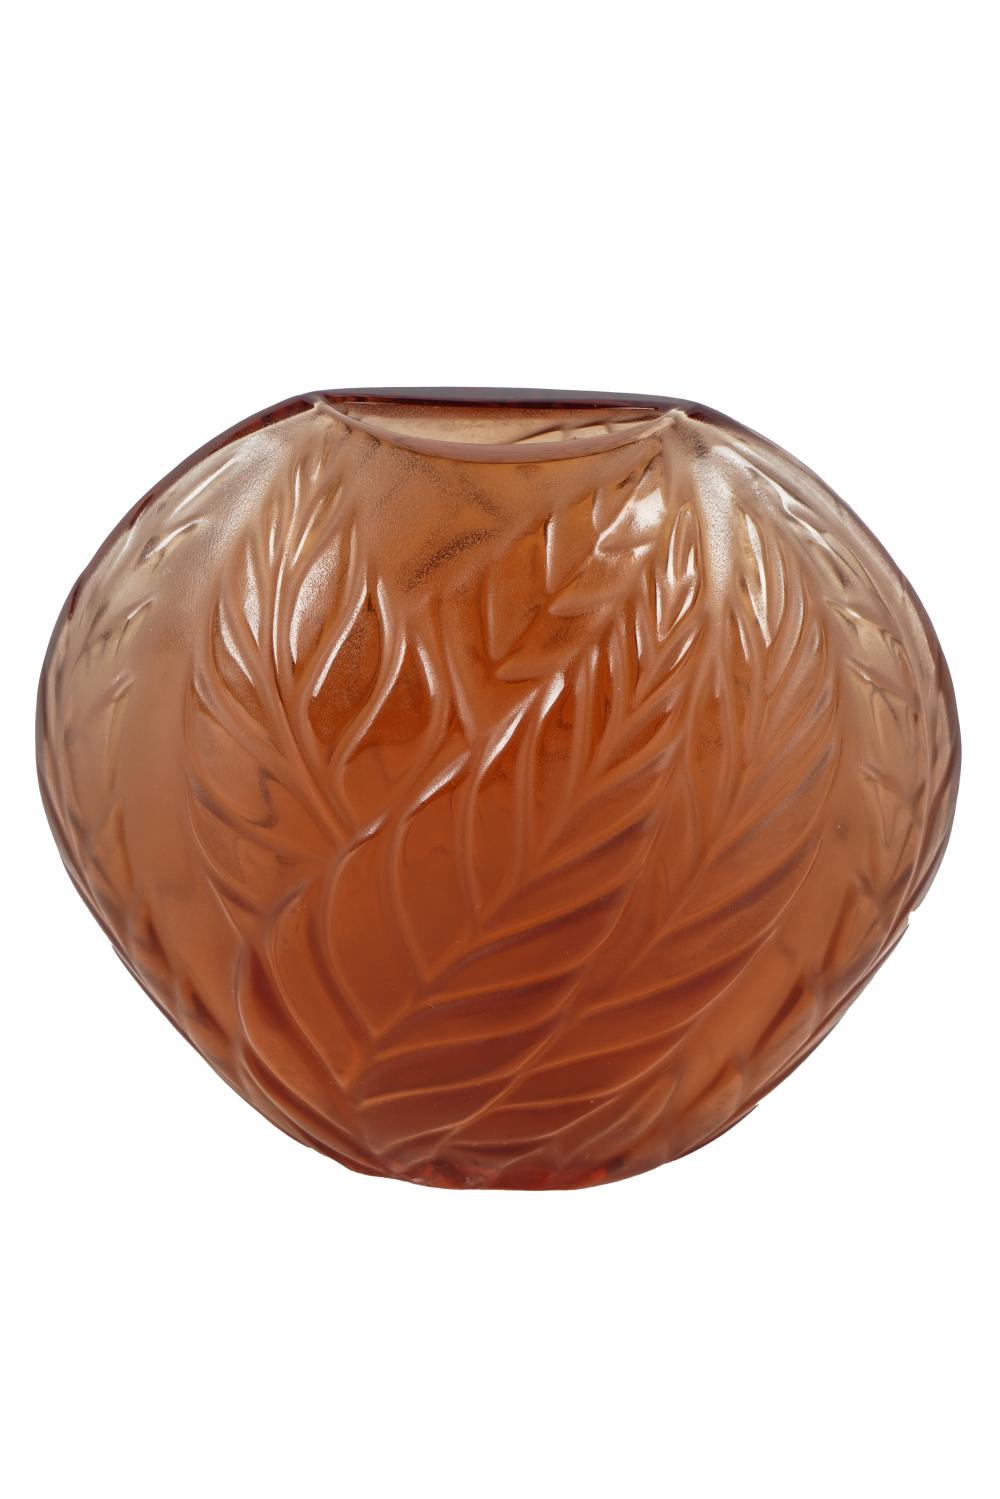 LALIQUE MOLDED GLASS VASEtwo tone 332976